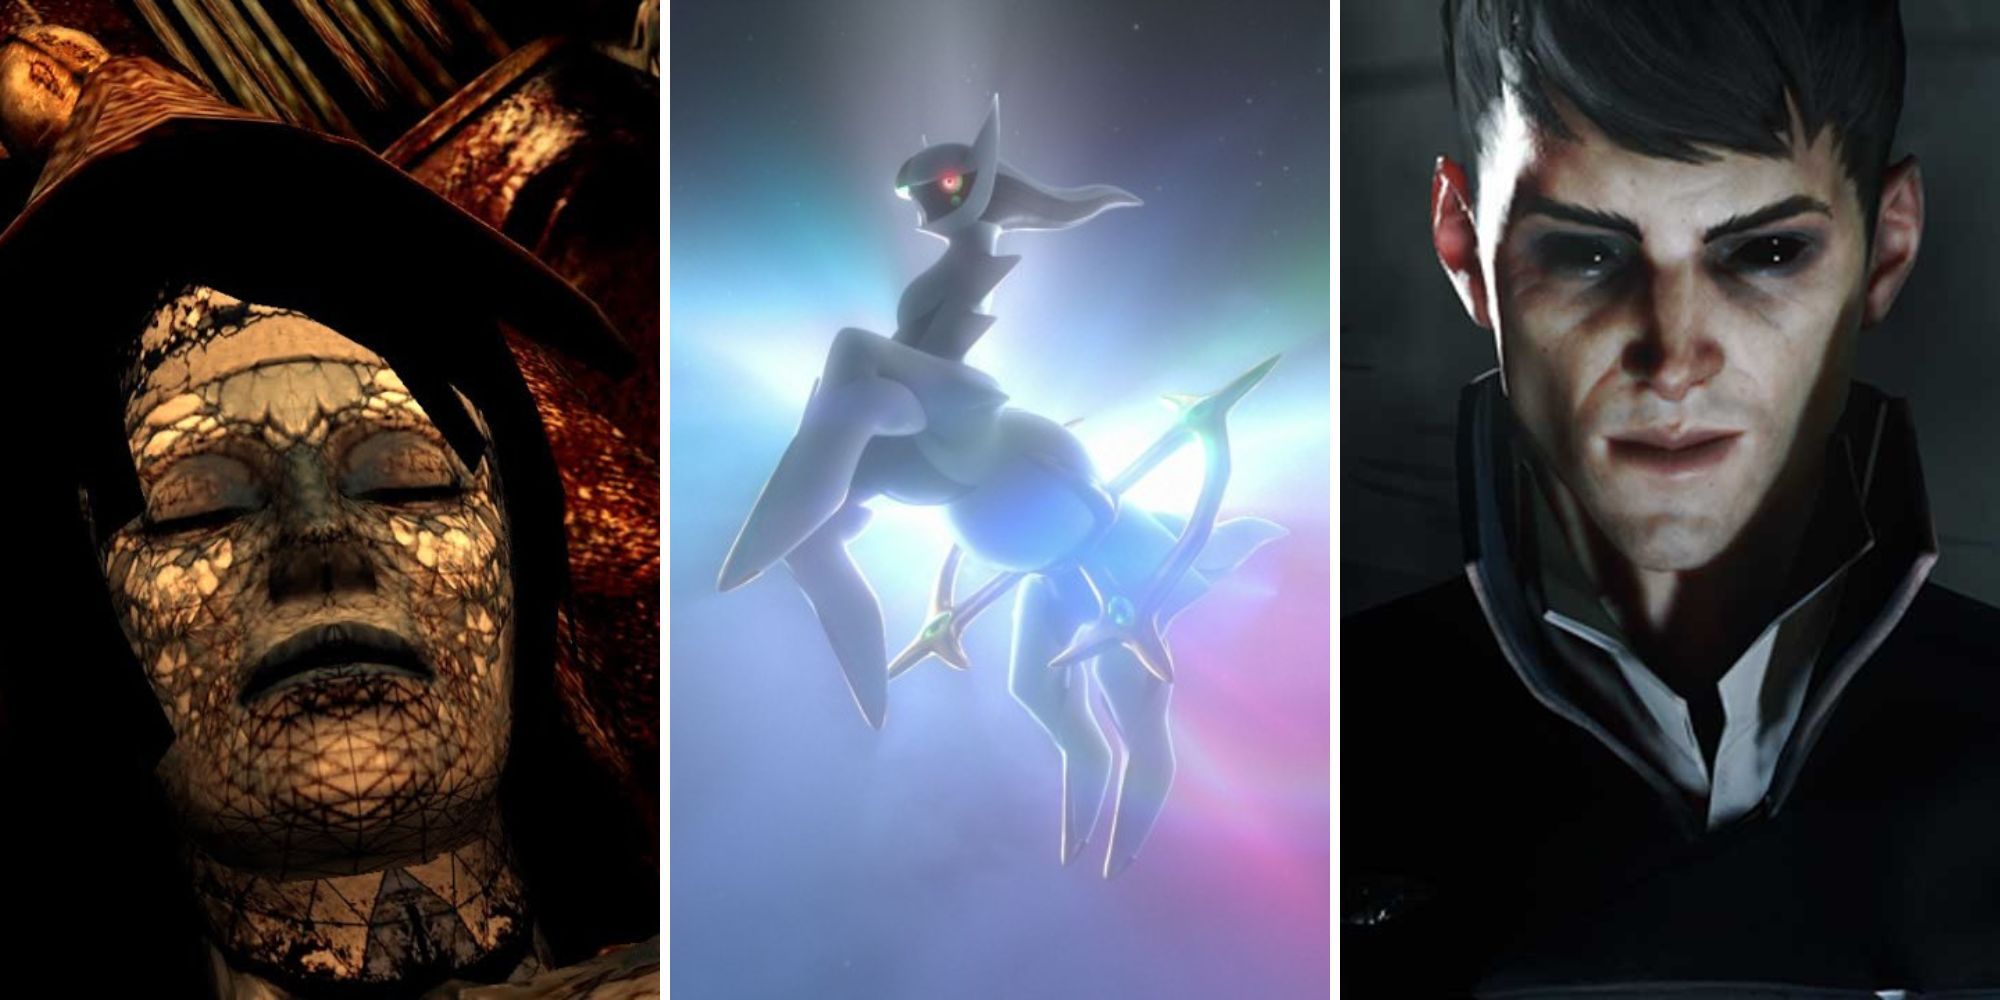 A grid showing three gods from the games Silent Hill 3, Pokemon Legends: Arceus, and Dishonored 2